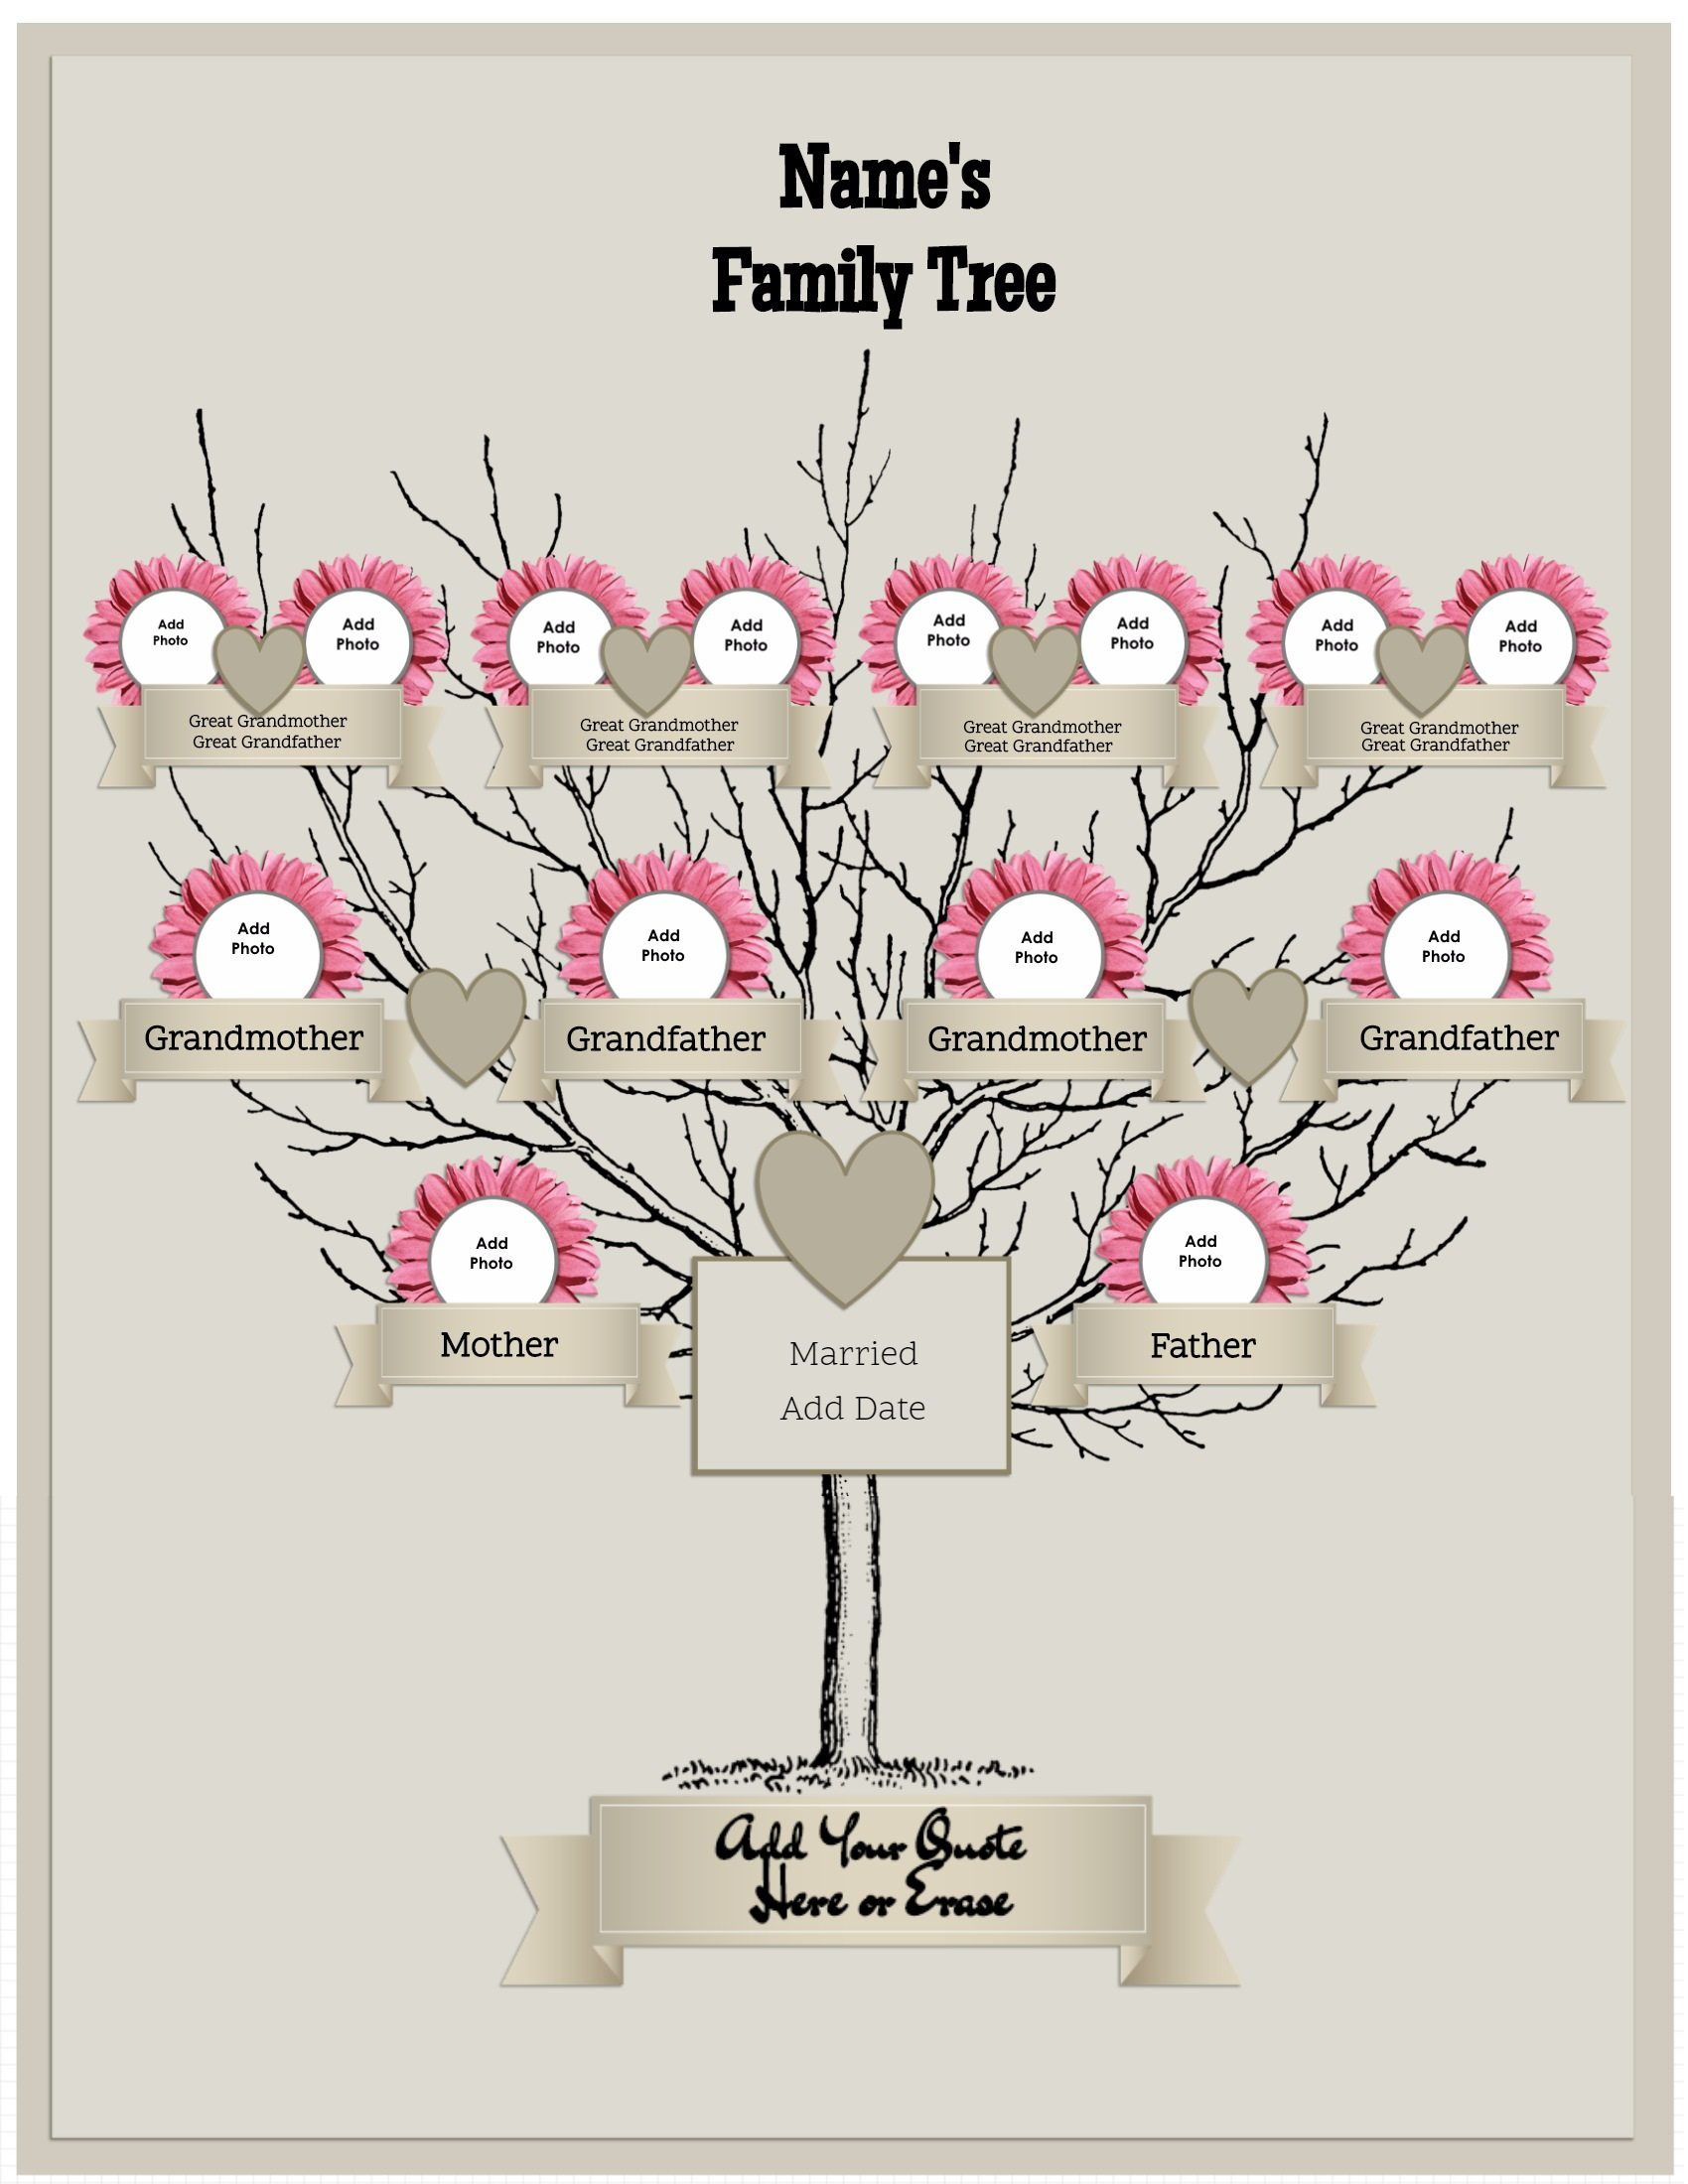 3 Generation Family Tree Generator | All Templates Are Free To Customize - Family Tree Maker Online Free Printable